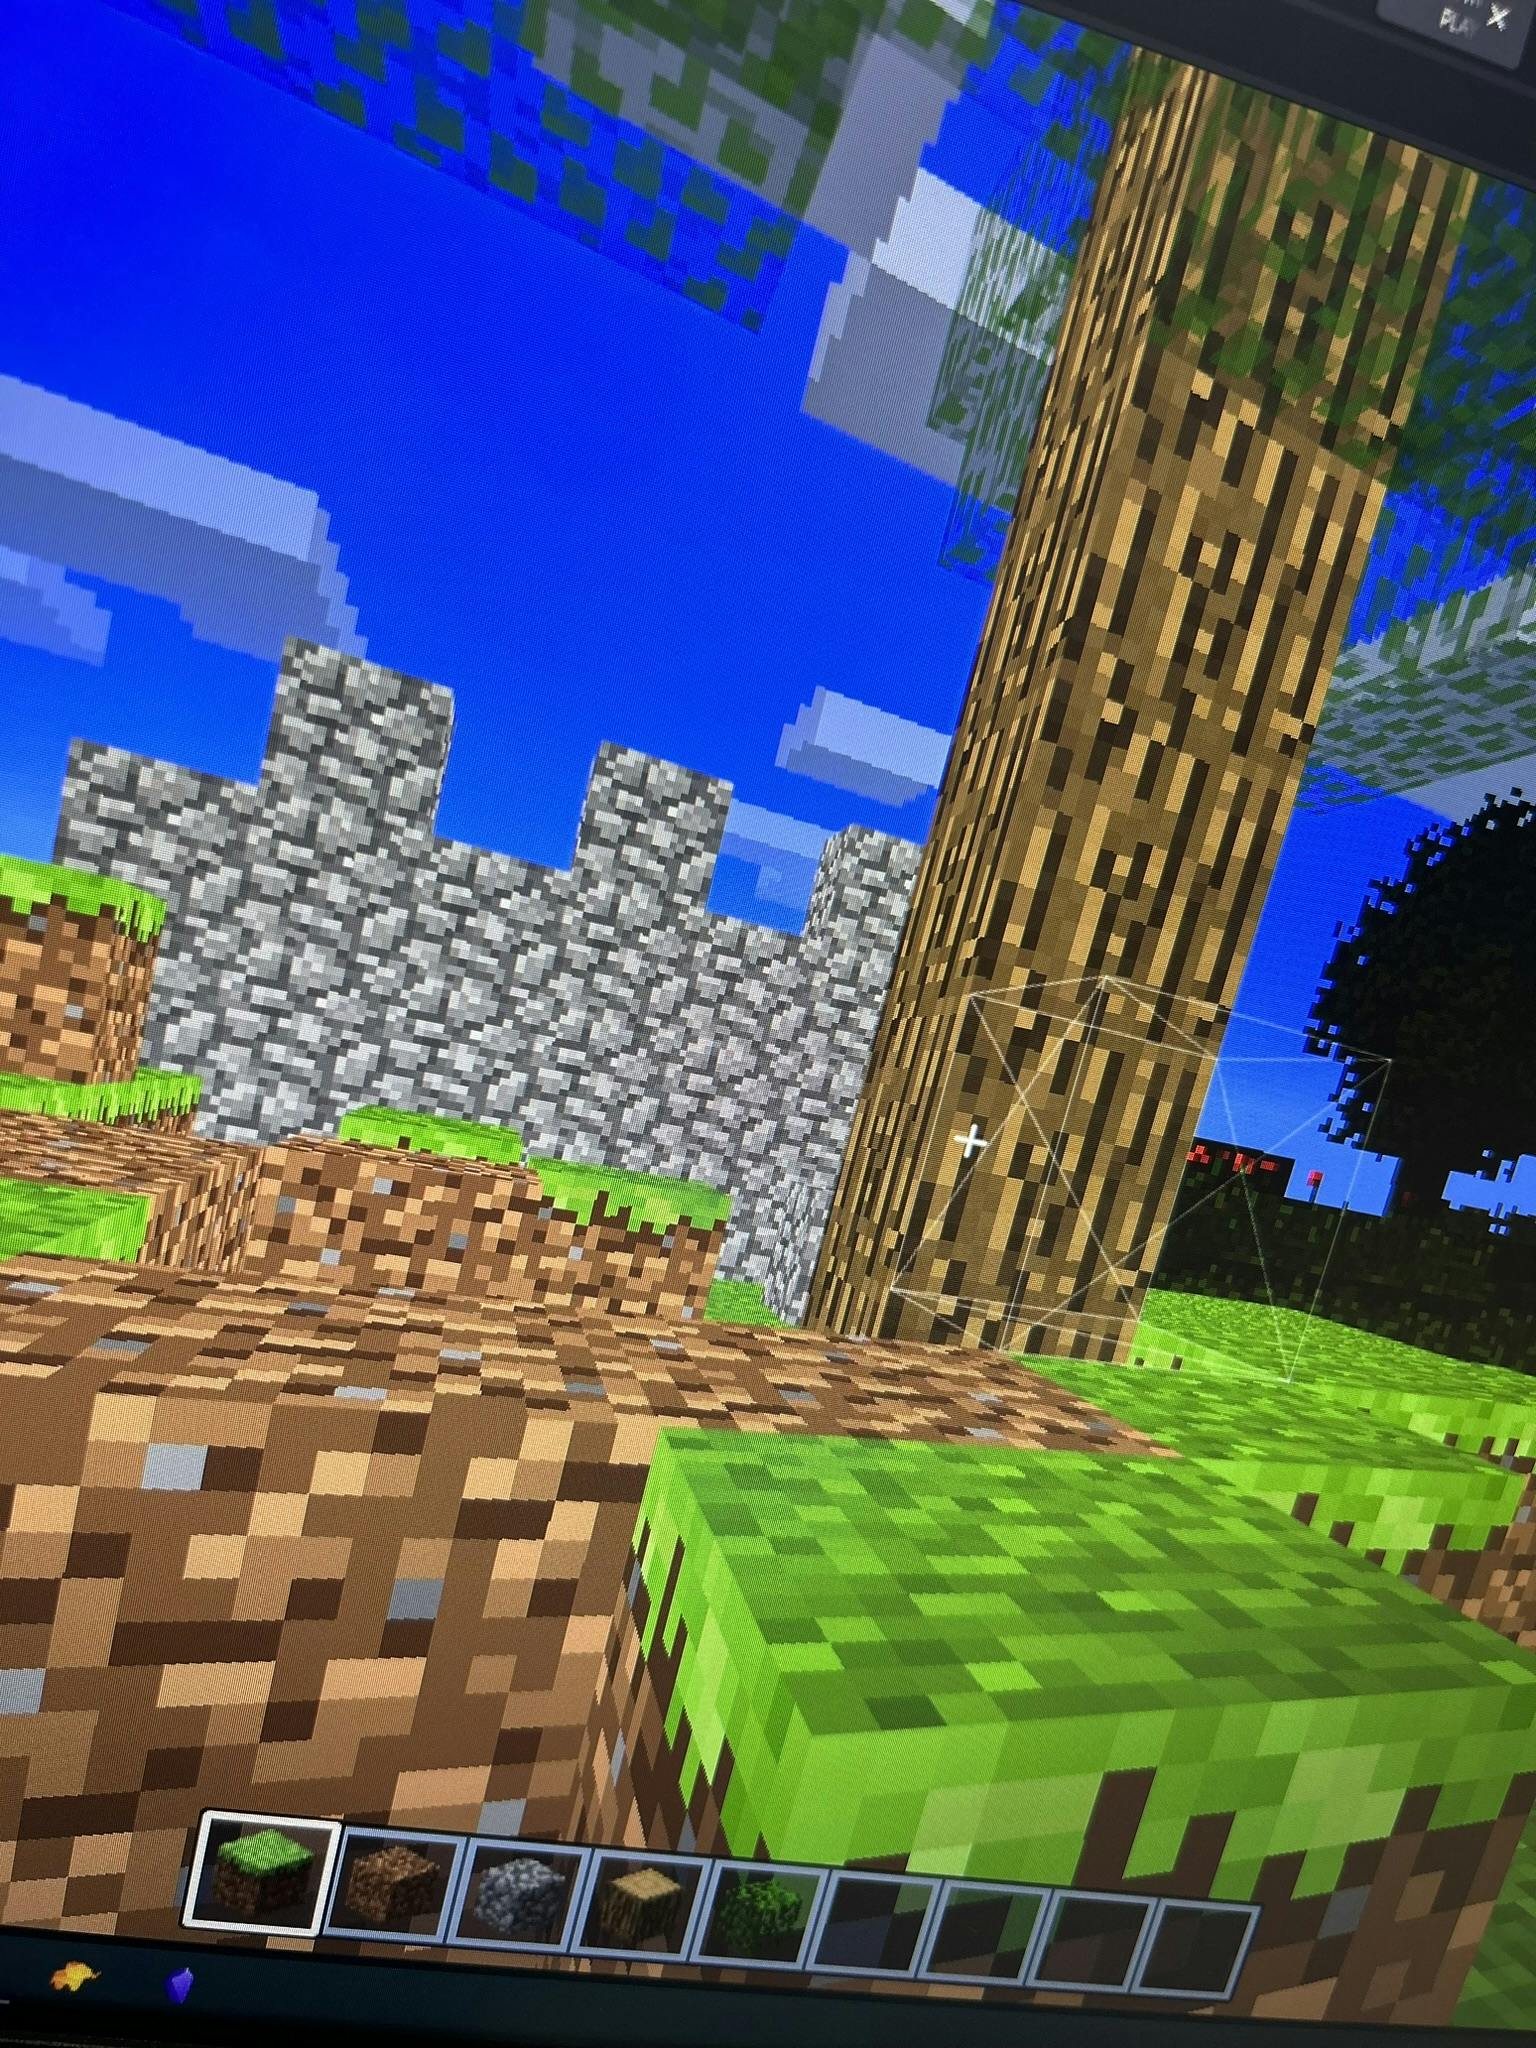 A Minecraft-like sandbox game. There's a block selector at the bottom which includes a grass, dirt, cobblestone, wood and leaves block. In front, there are grass and leaves block placed in the terrain.